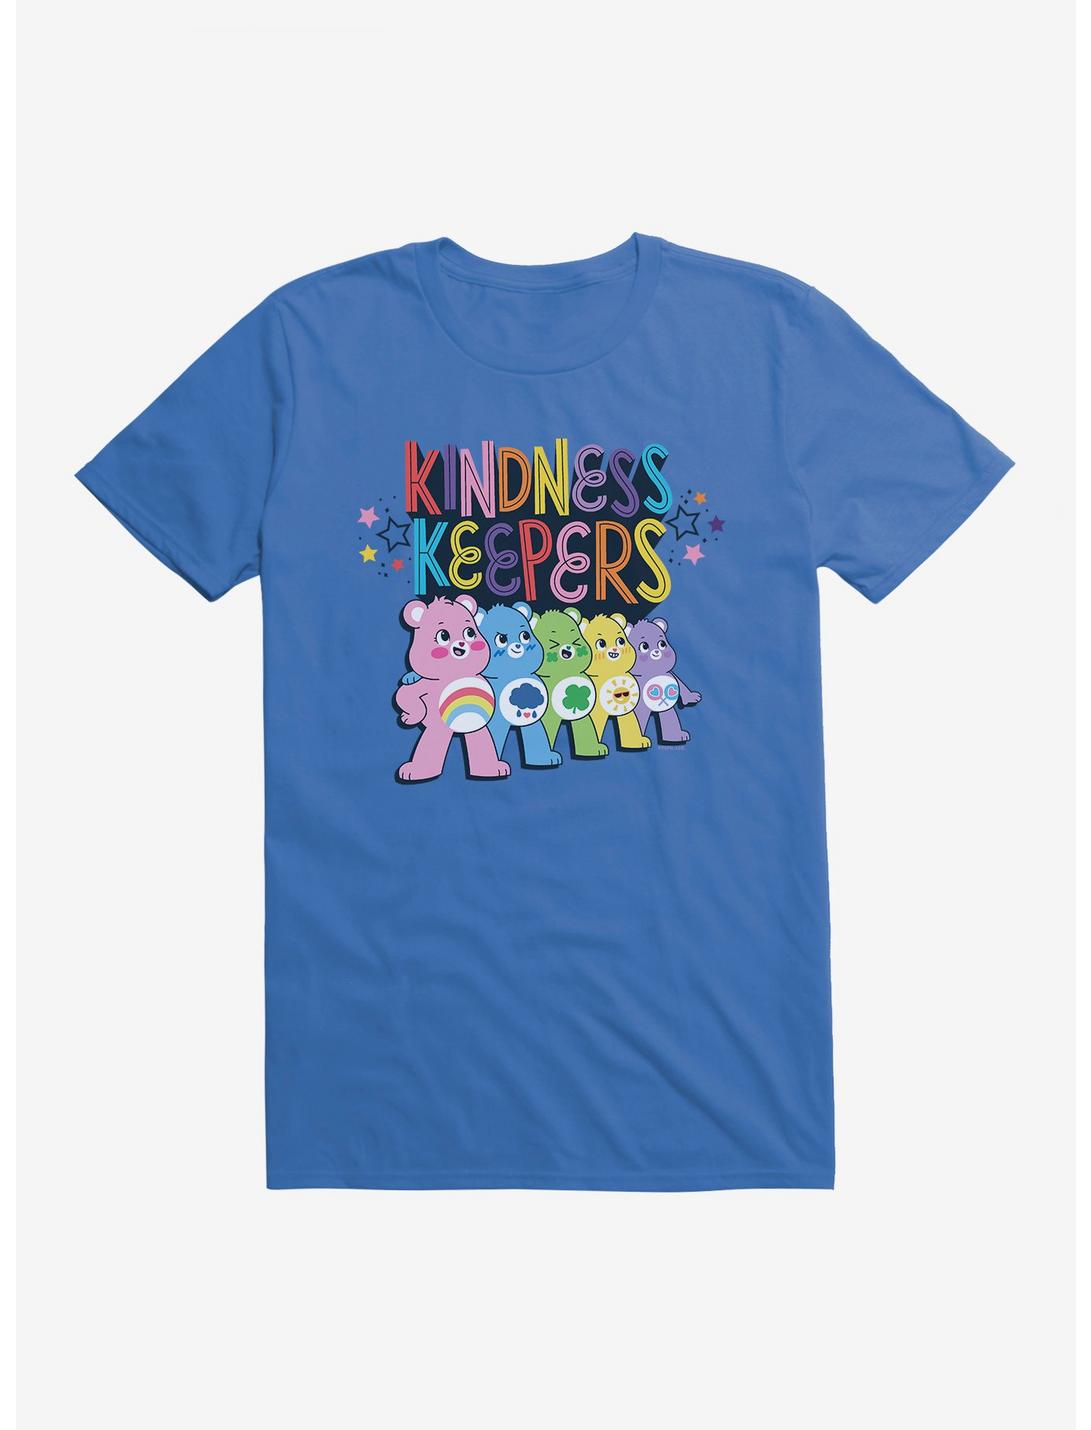 Care Bears Kindness Keepers T-Shirt, ROYAL BLUE, hi-res